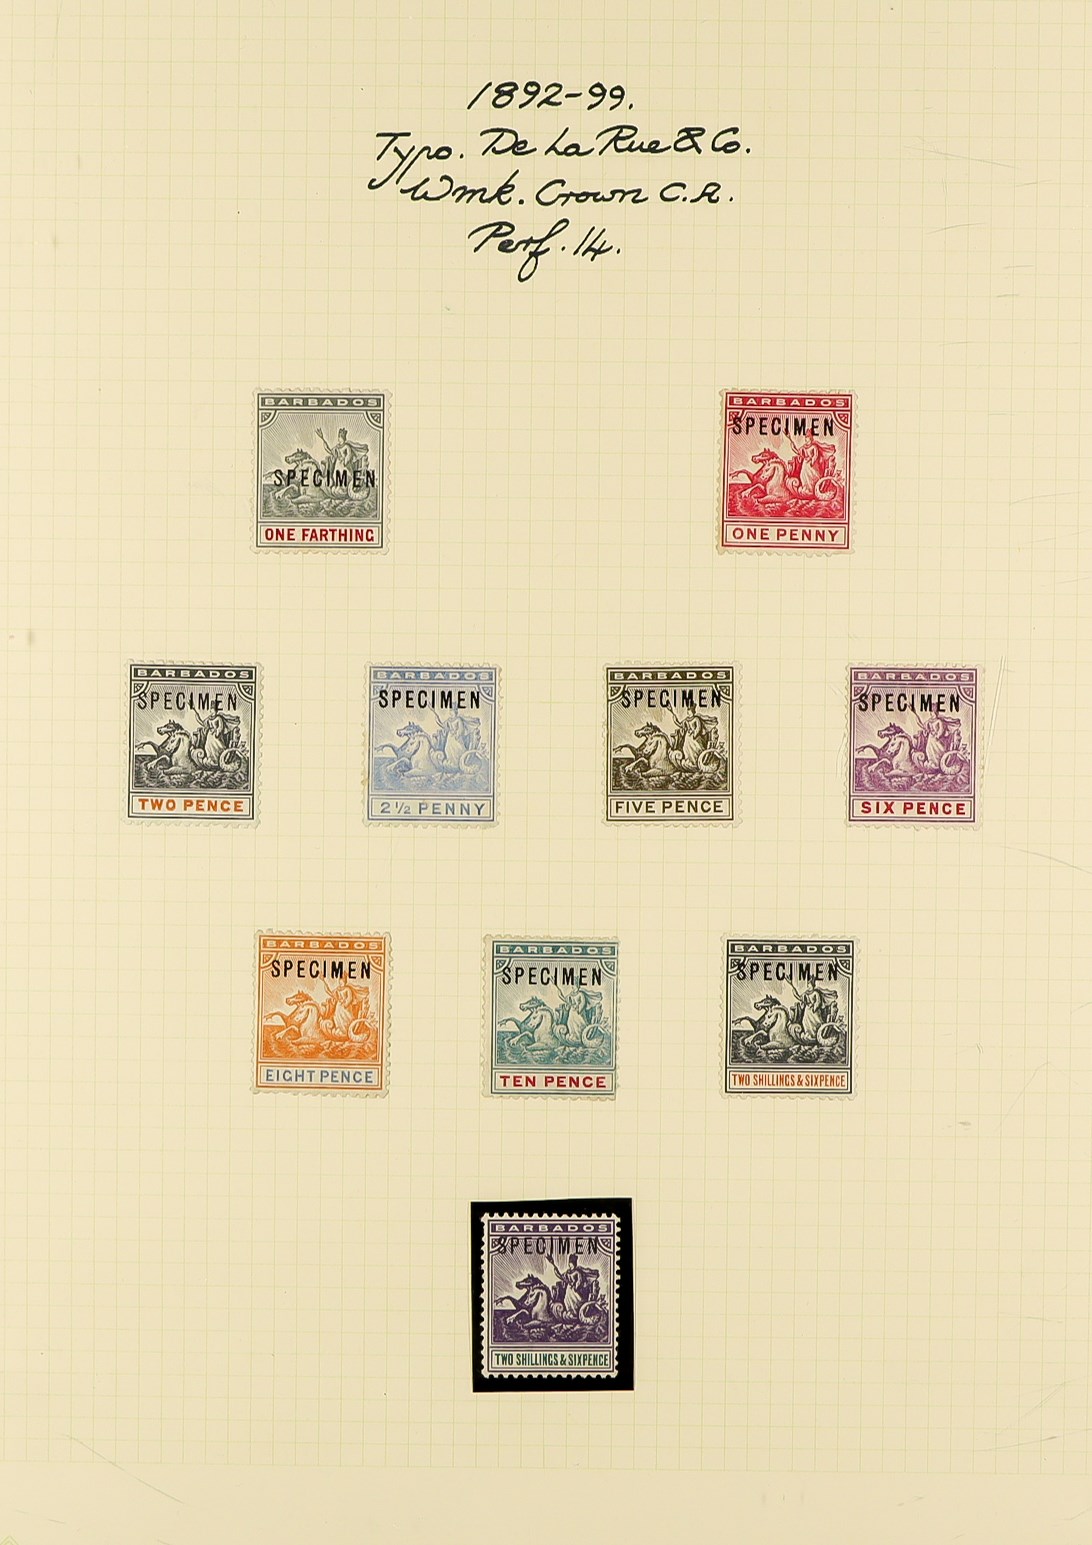 BARBADOS 1892 - 1903 COLLECTION OF "SPECIMEN" OVERPRINTS. 1892 - 1903 Seal of Colony collection of